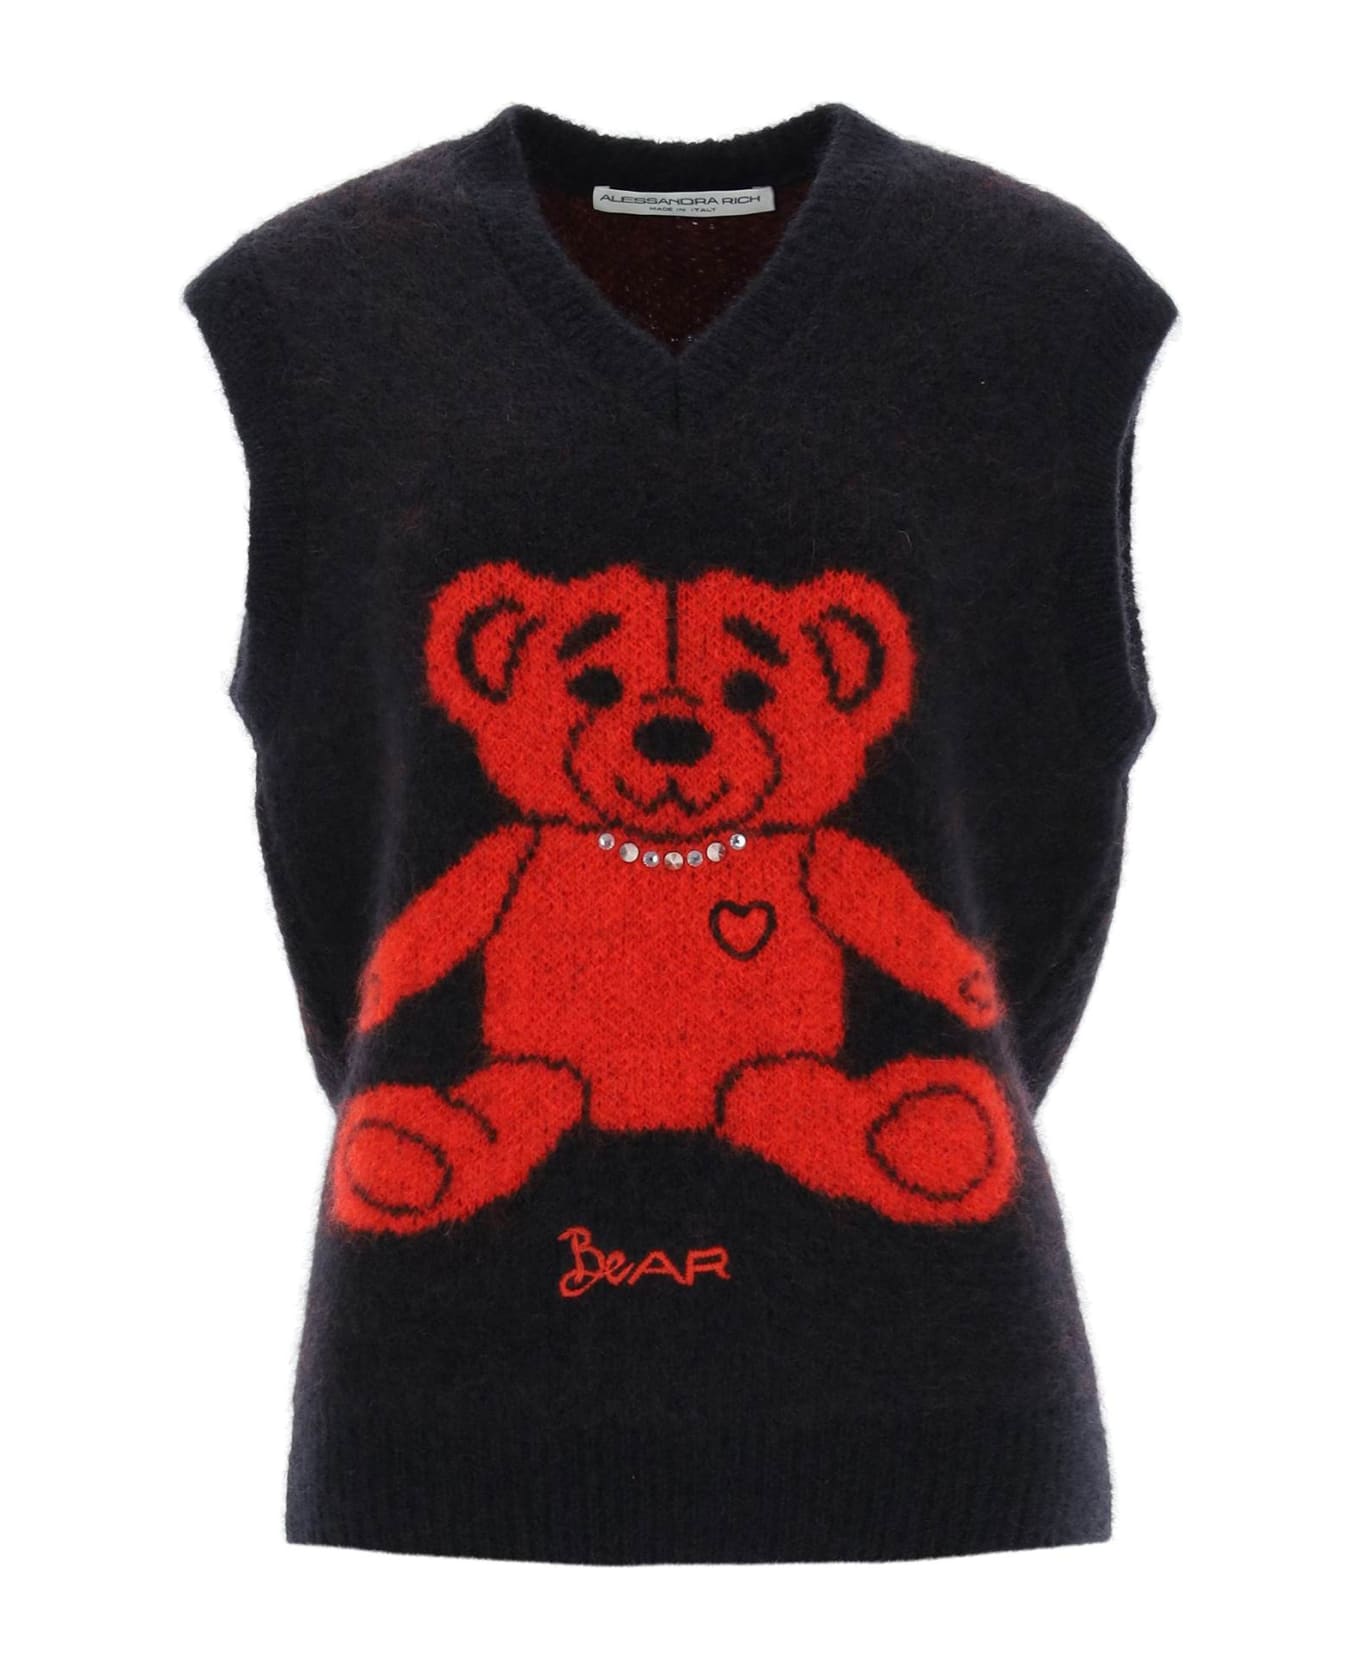 Alessandra Rich Vest In Jacquard Knit With Bear Motif And Appliques - Black